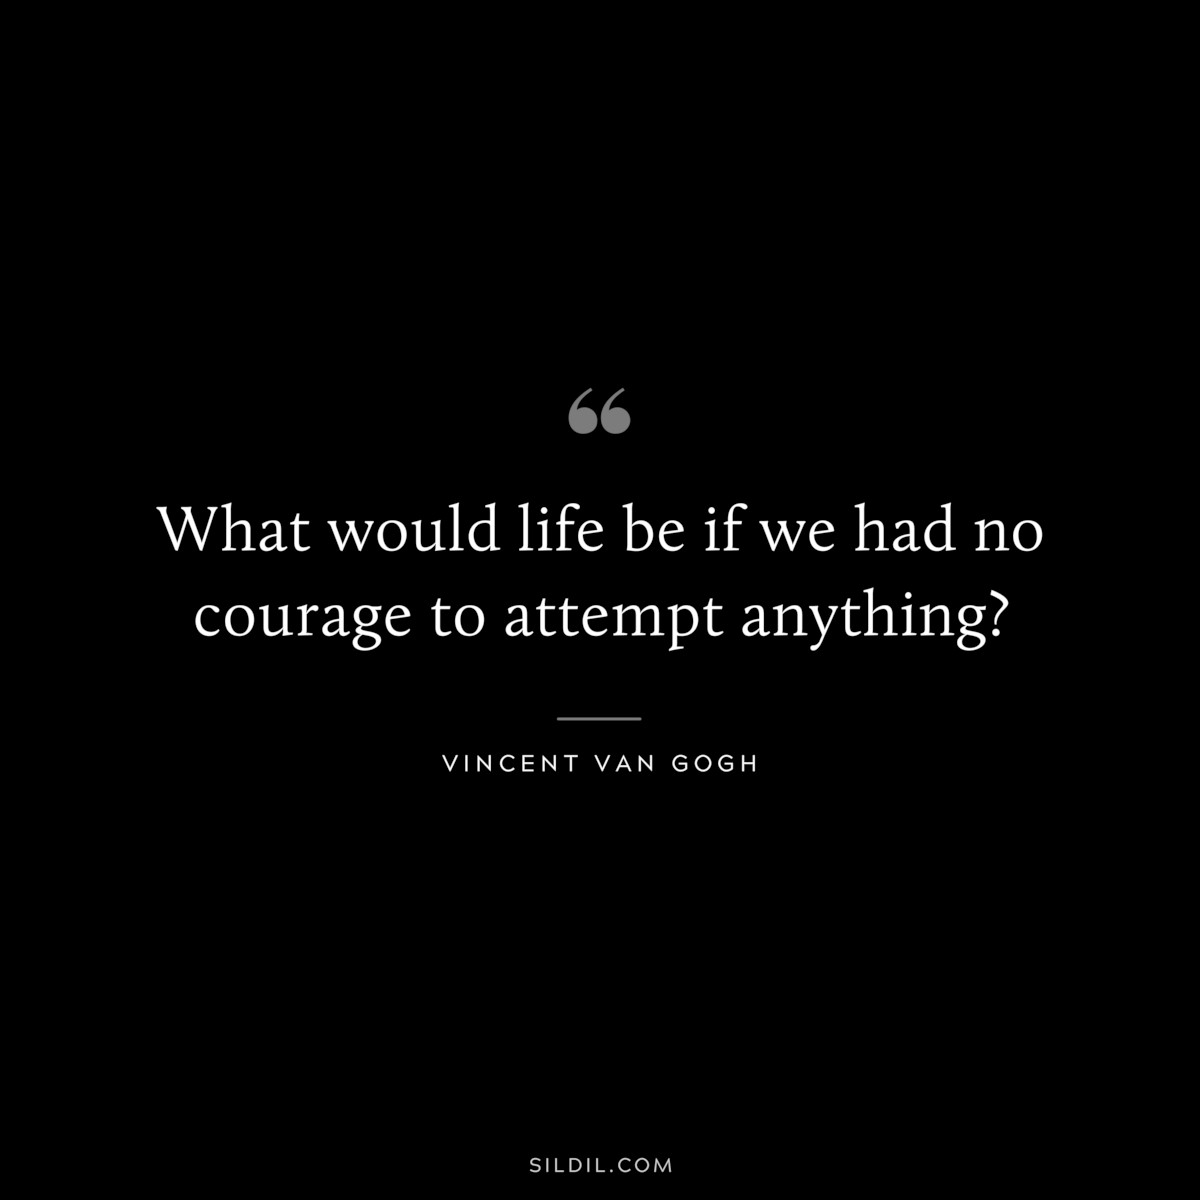 What would life be if we had no courage to attempt anything? ― Vincent van Gogh